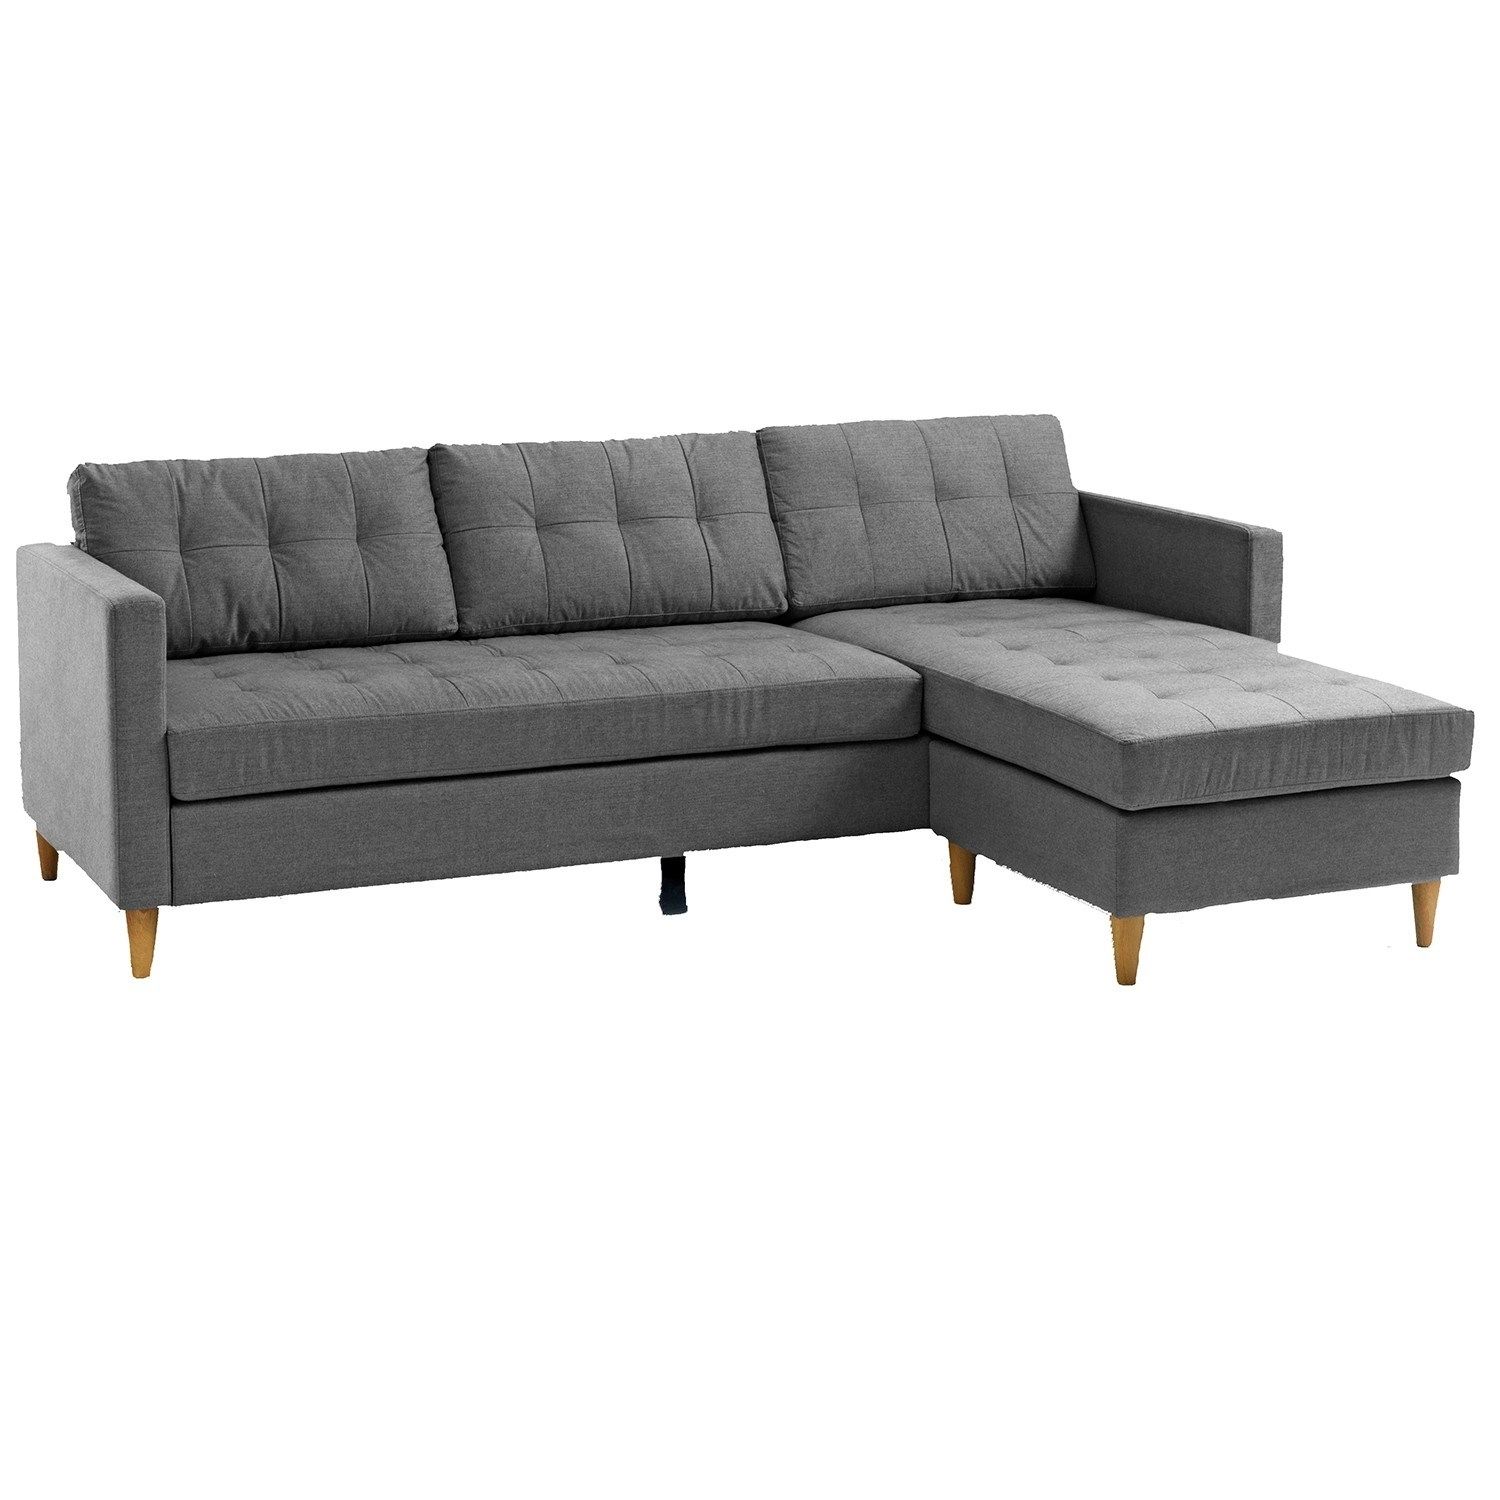 Sofa Chaise | Ladale Sofa Chaise Ashley Furniture Homestore Couches Pertaining To Taren Reversible Sofa/chaise Sleeper Sectionals With Storage Ottoman (View 25 of 25)